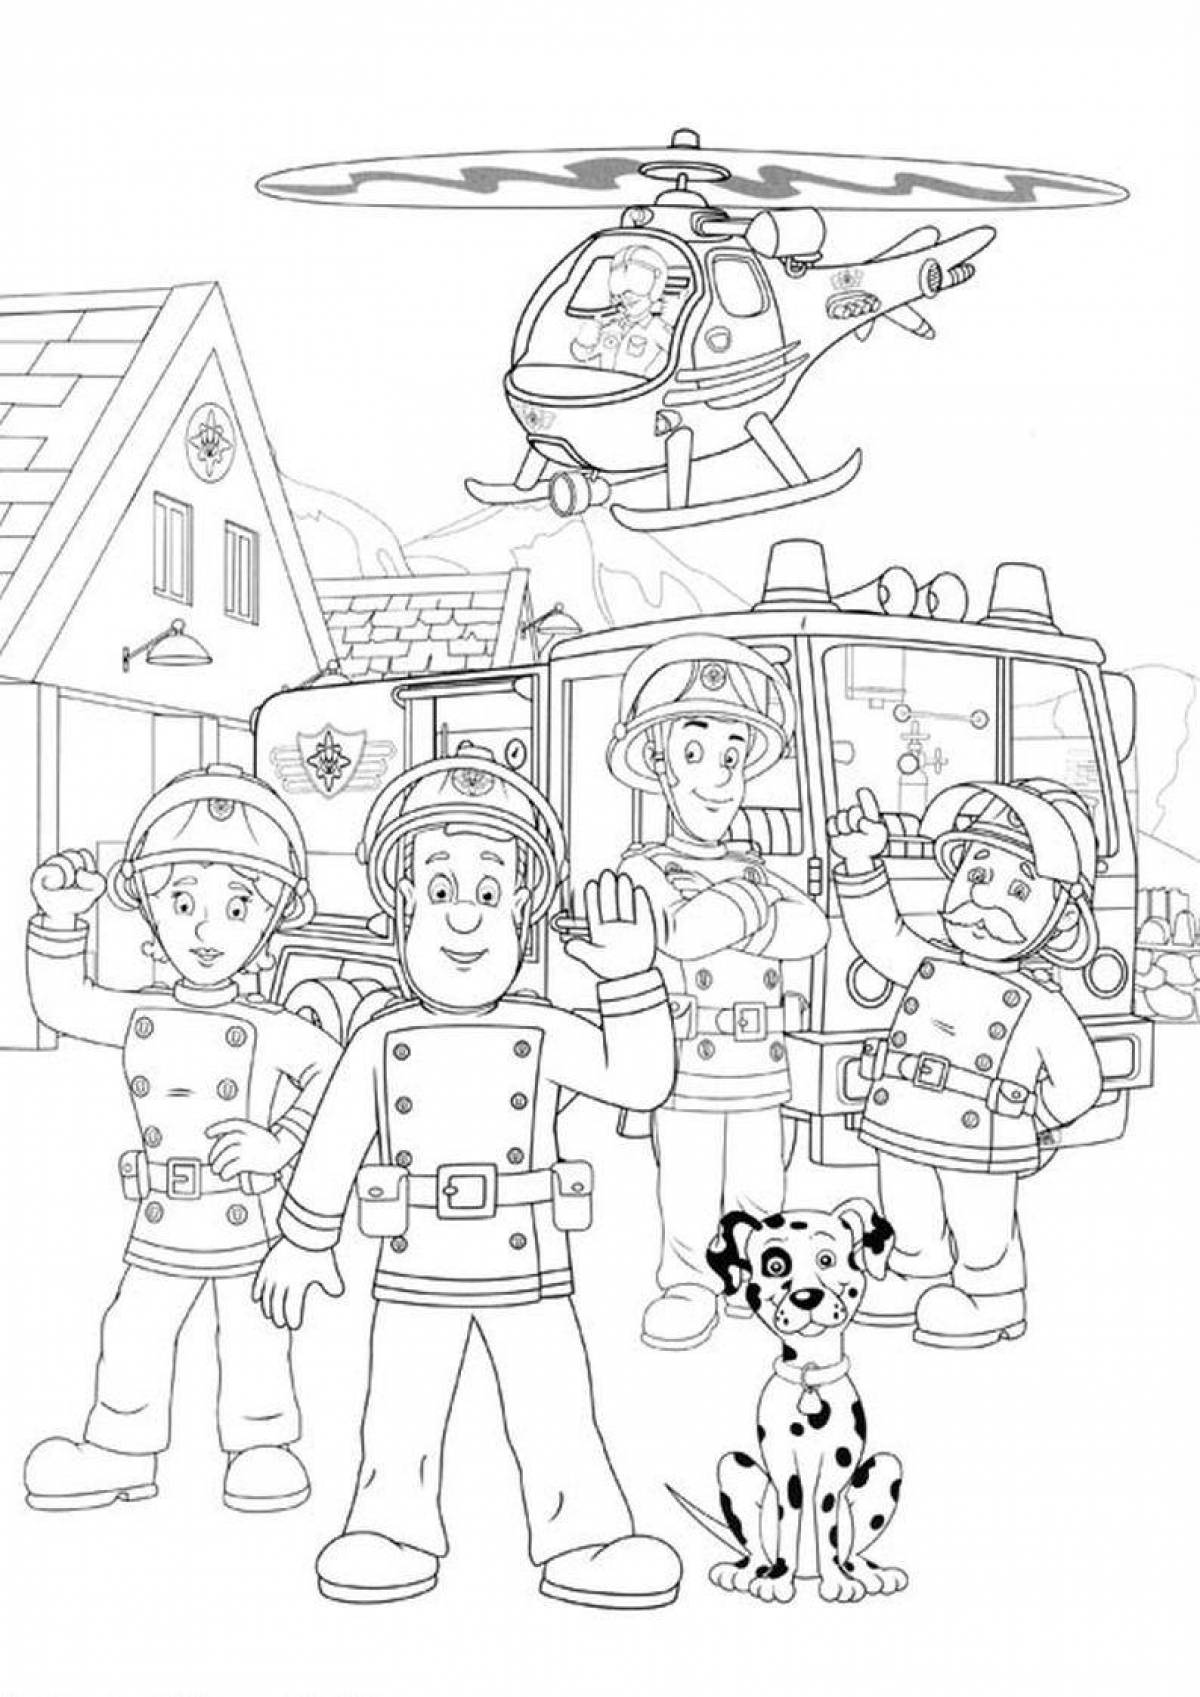 Colorful fireman sam coloring book for kids